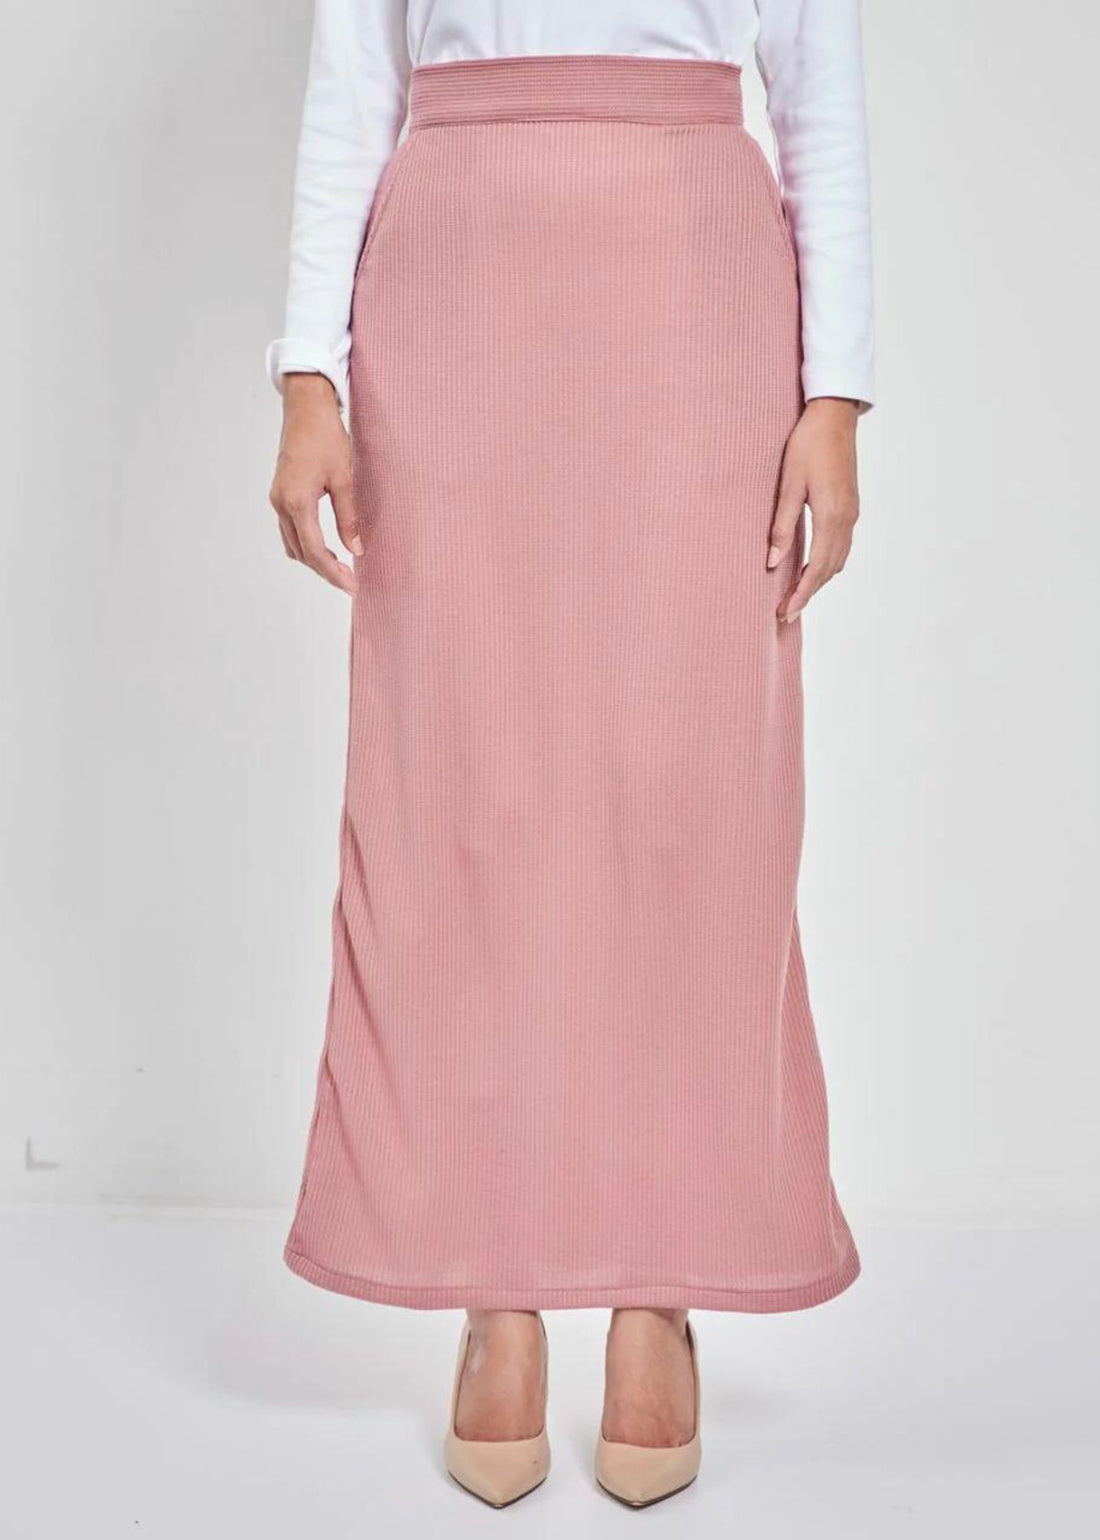 DONNA A Line Skirt in Watermelon Pink